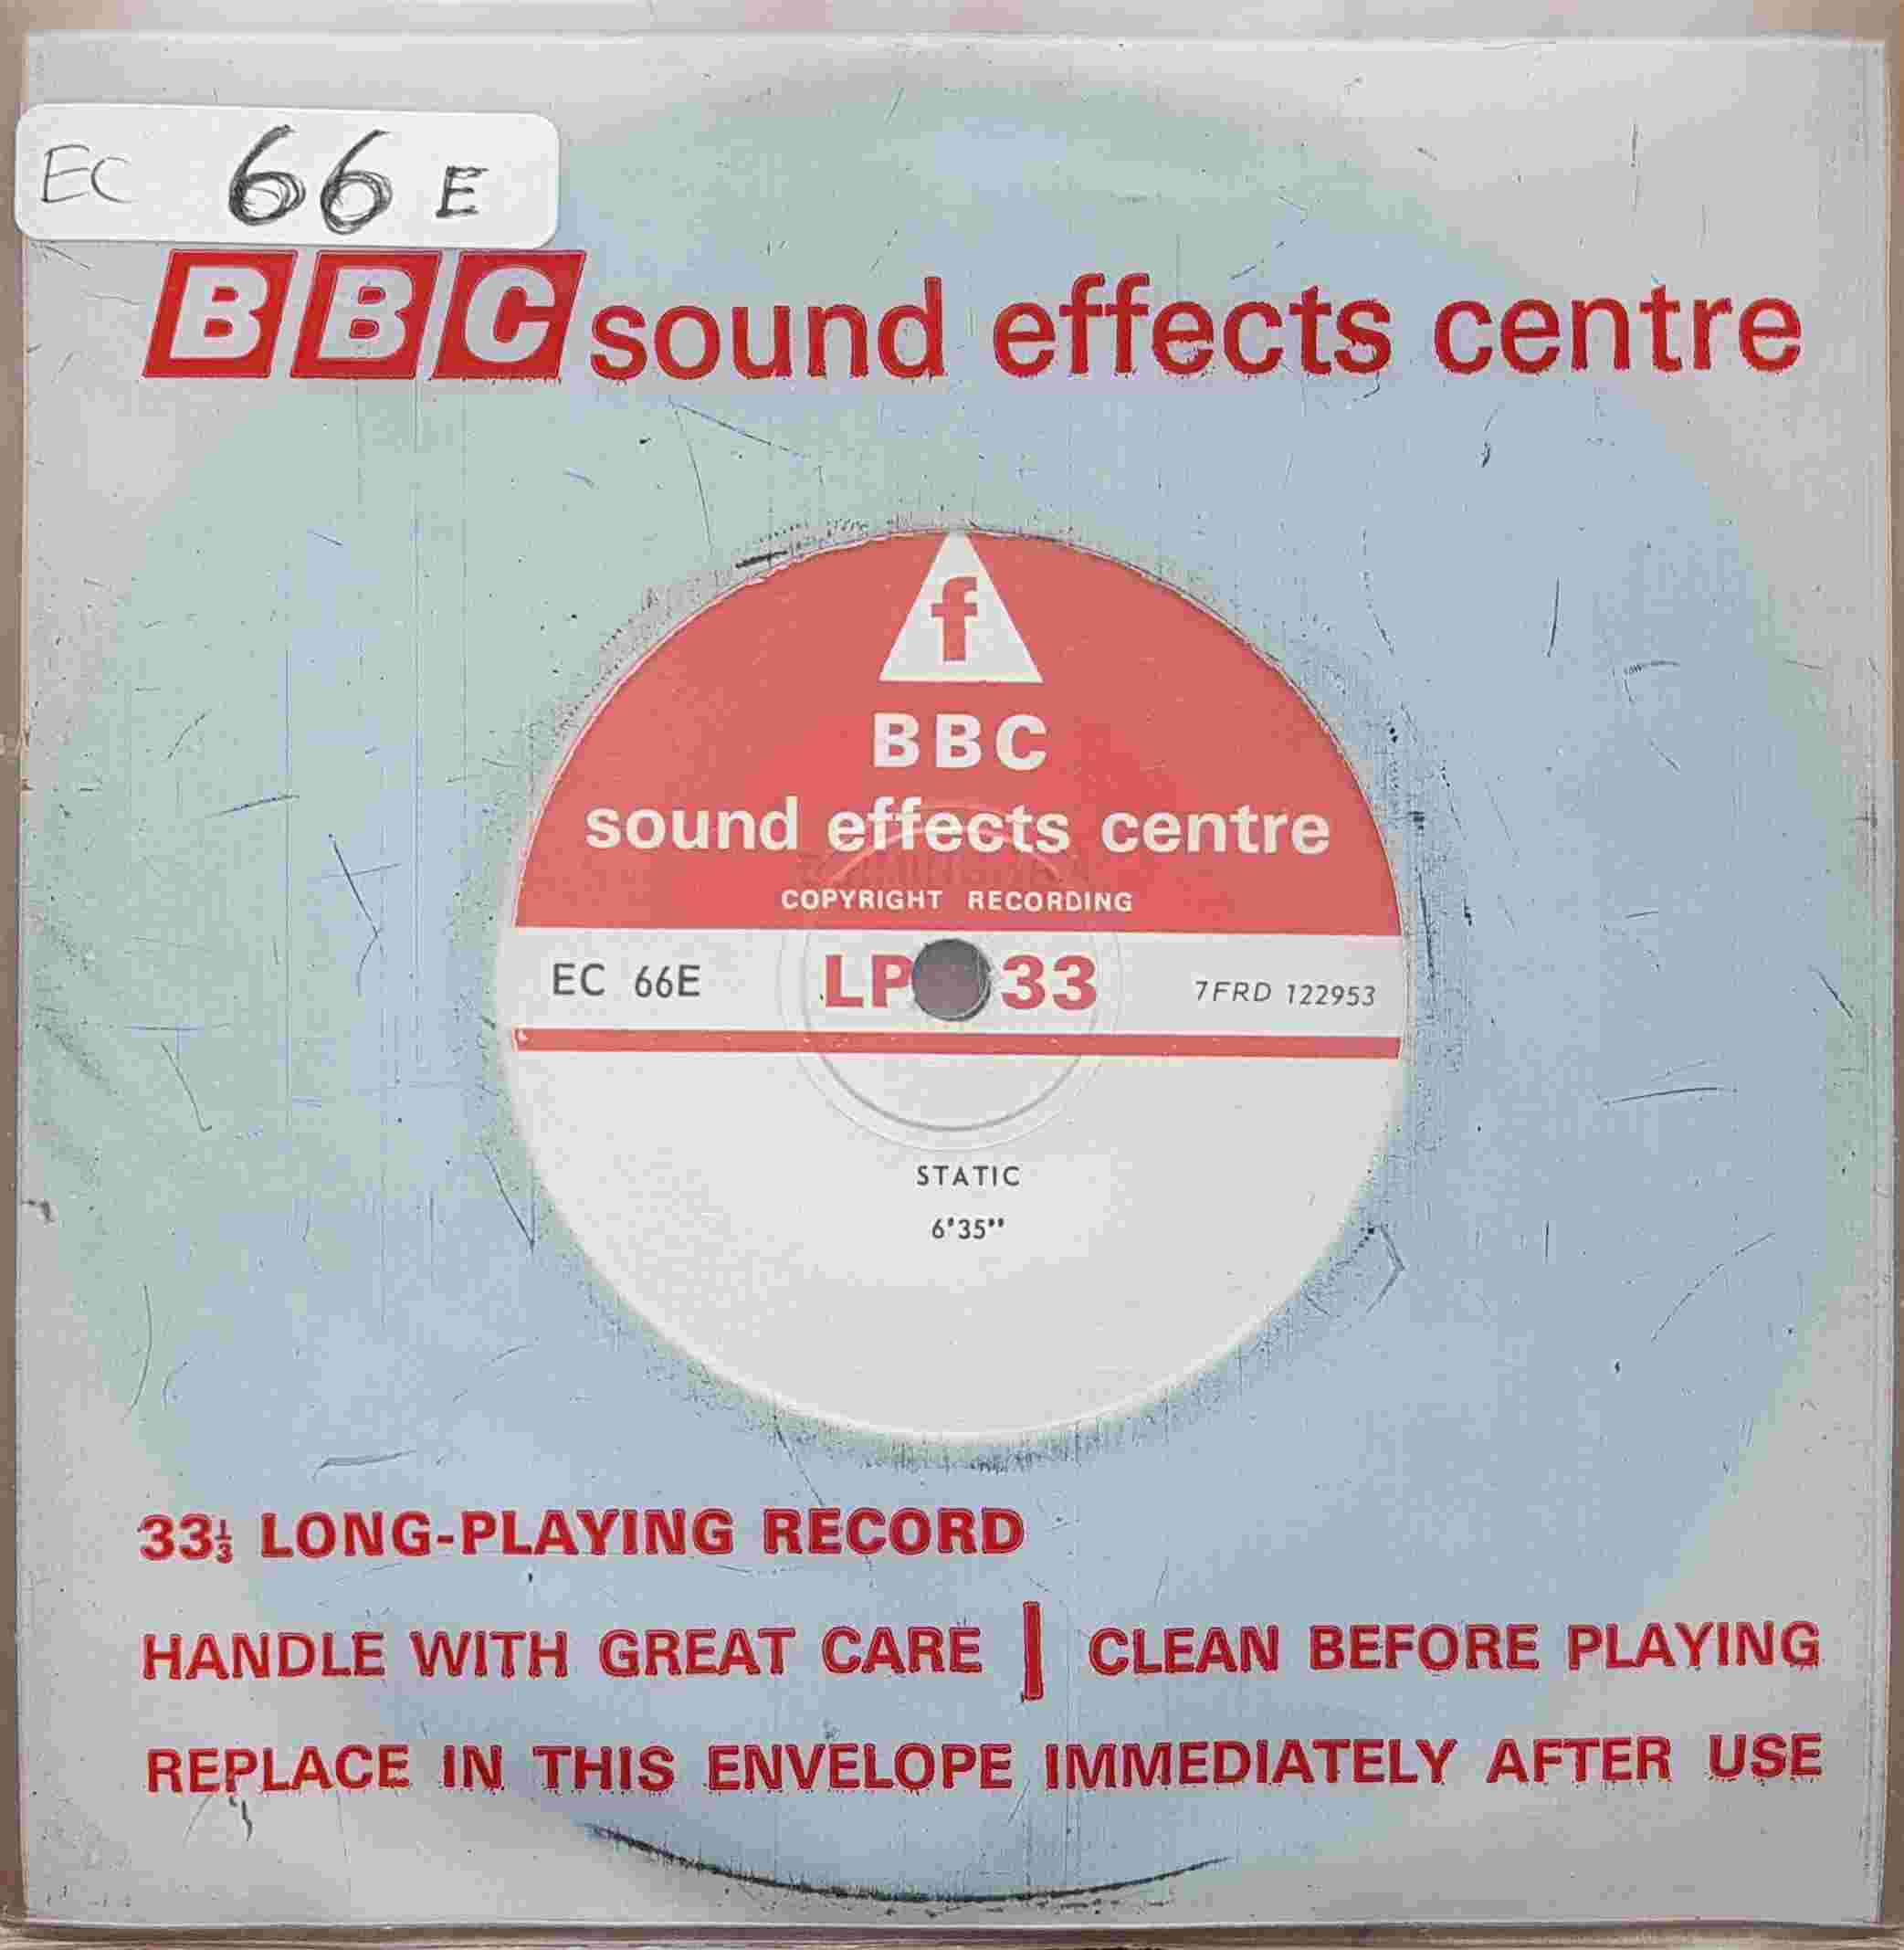 Picture of EC 66E Static by artist Not registered from the BBC records and Tapes library